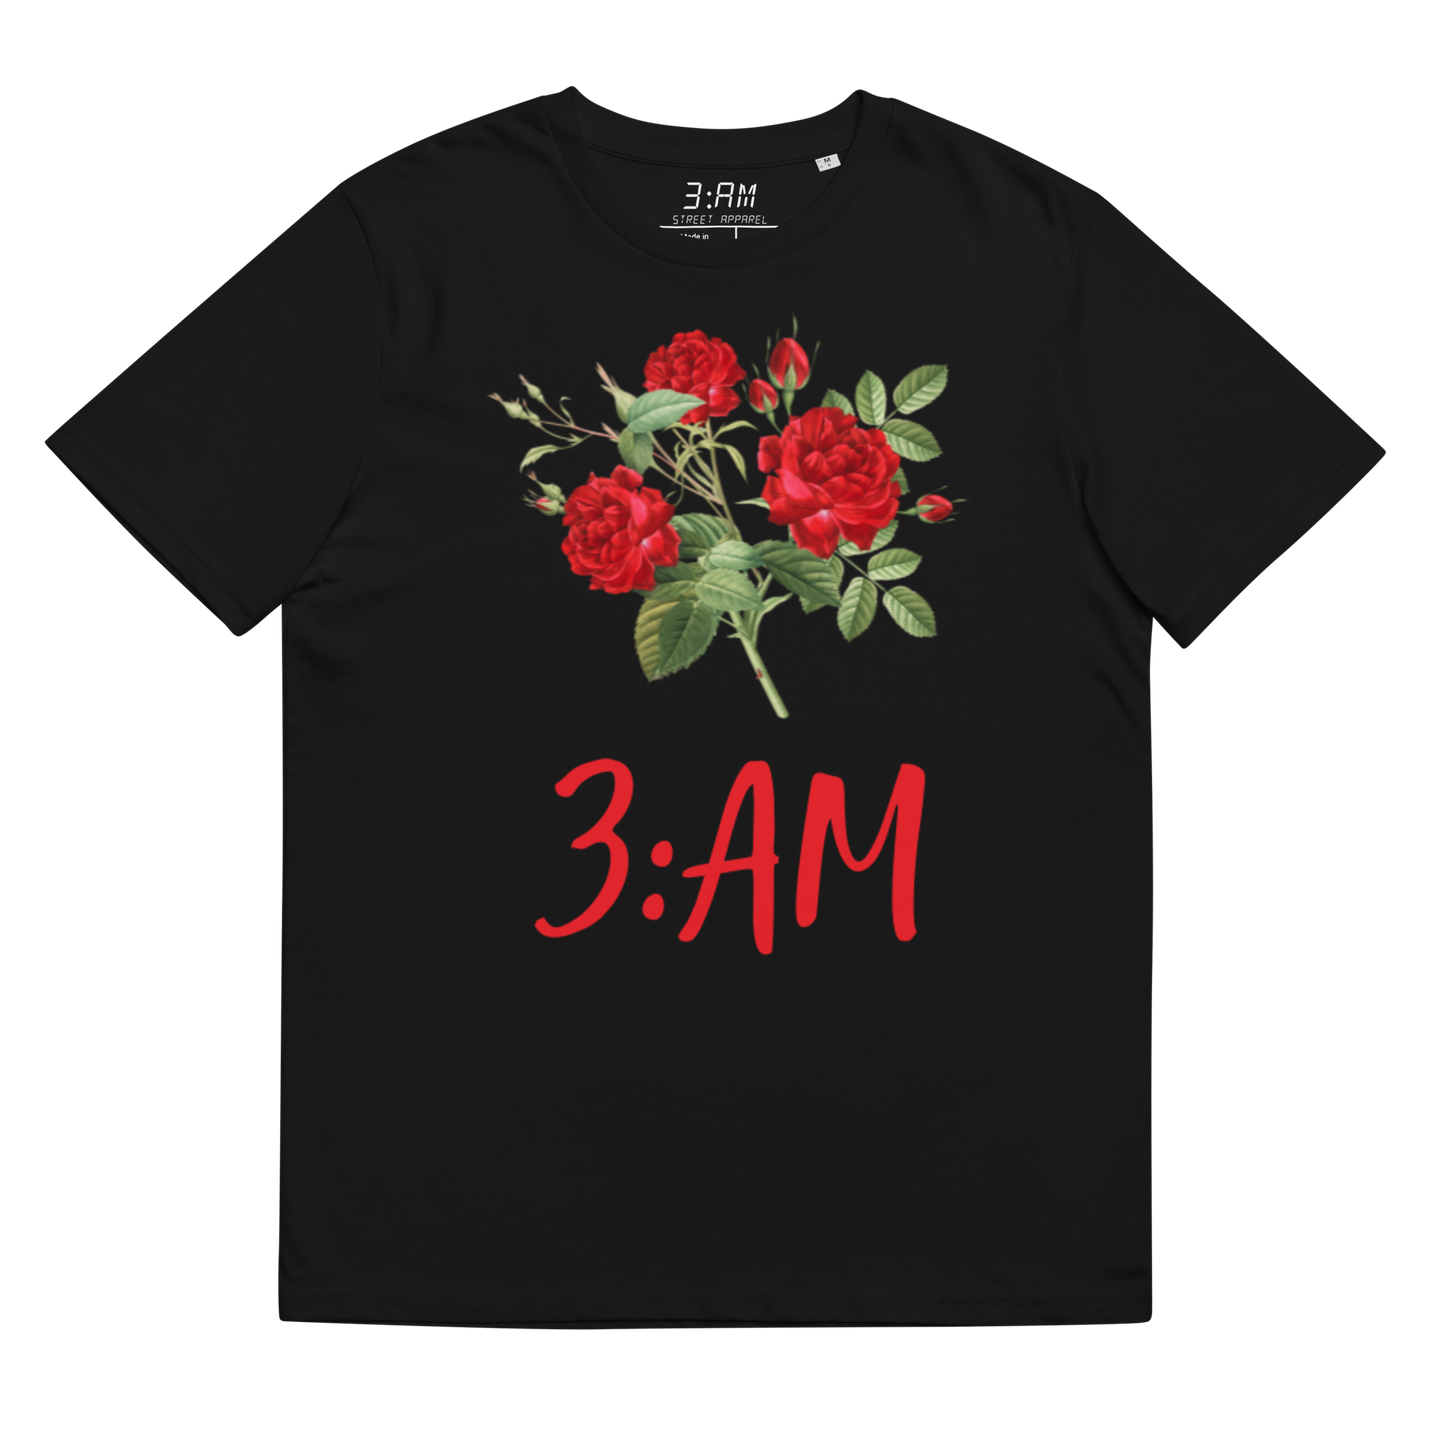 3:AM Roses Tee